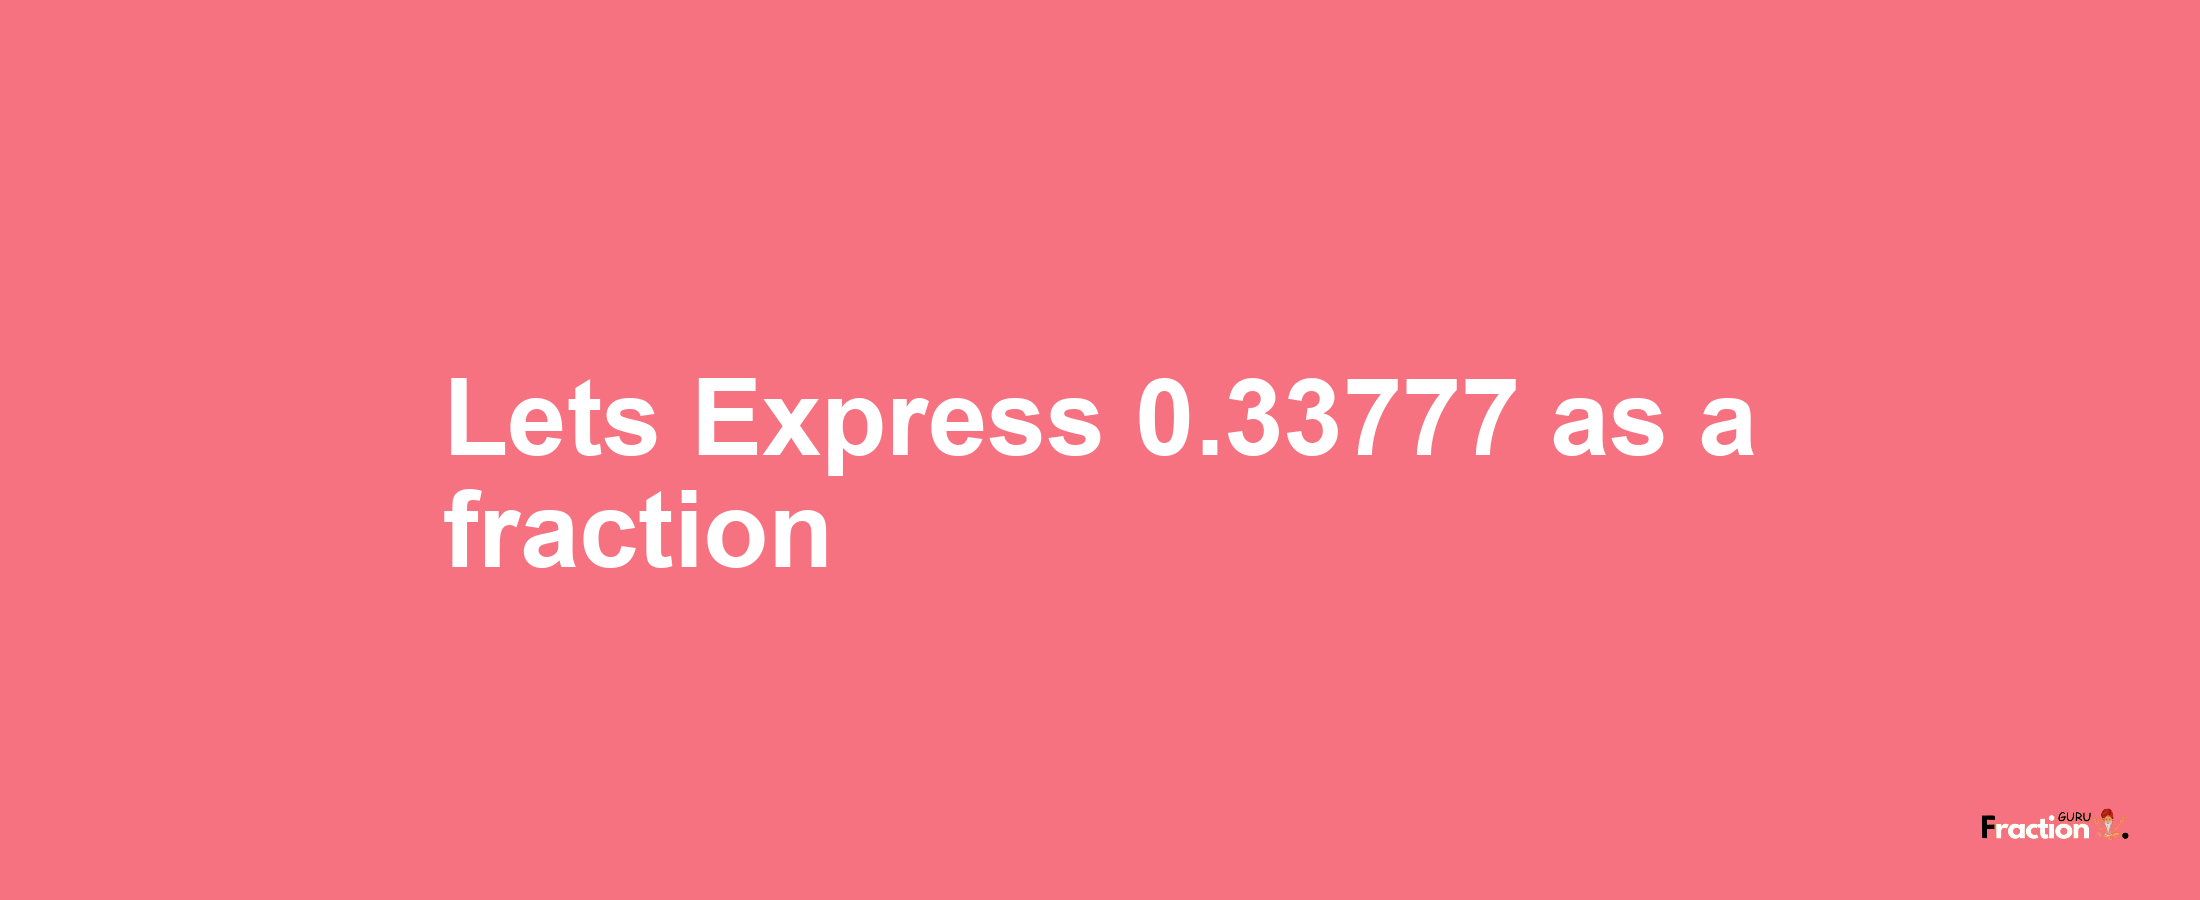 Lets Express 0.33777 as afraction